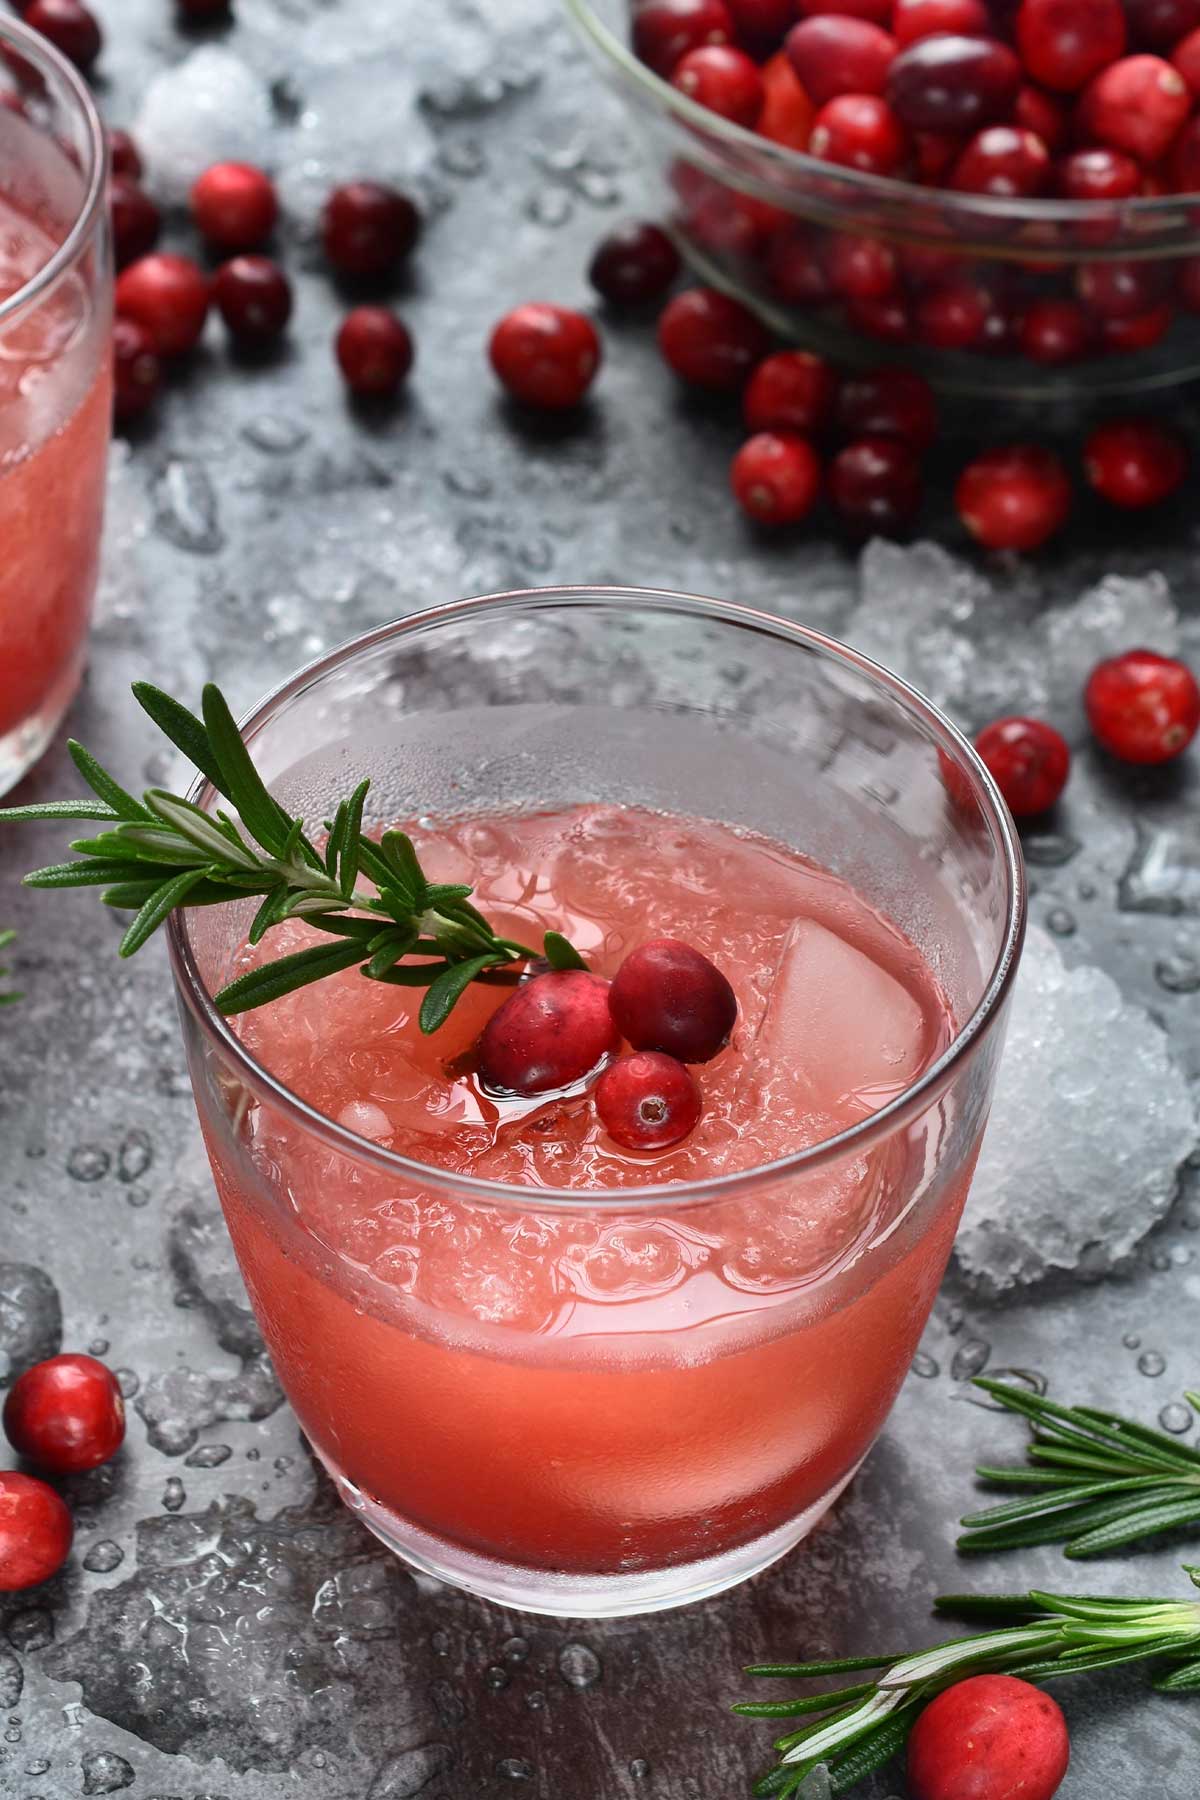 Glass of cranberry margarita with fresh cranberries and a rosemary sprig for garnish, bowl of fresh cranberries in the background.